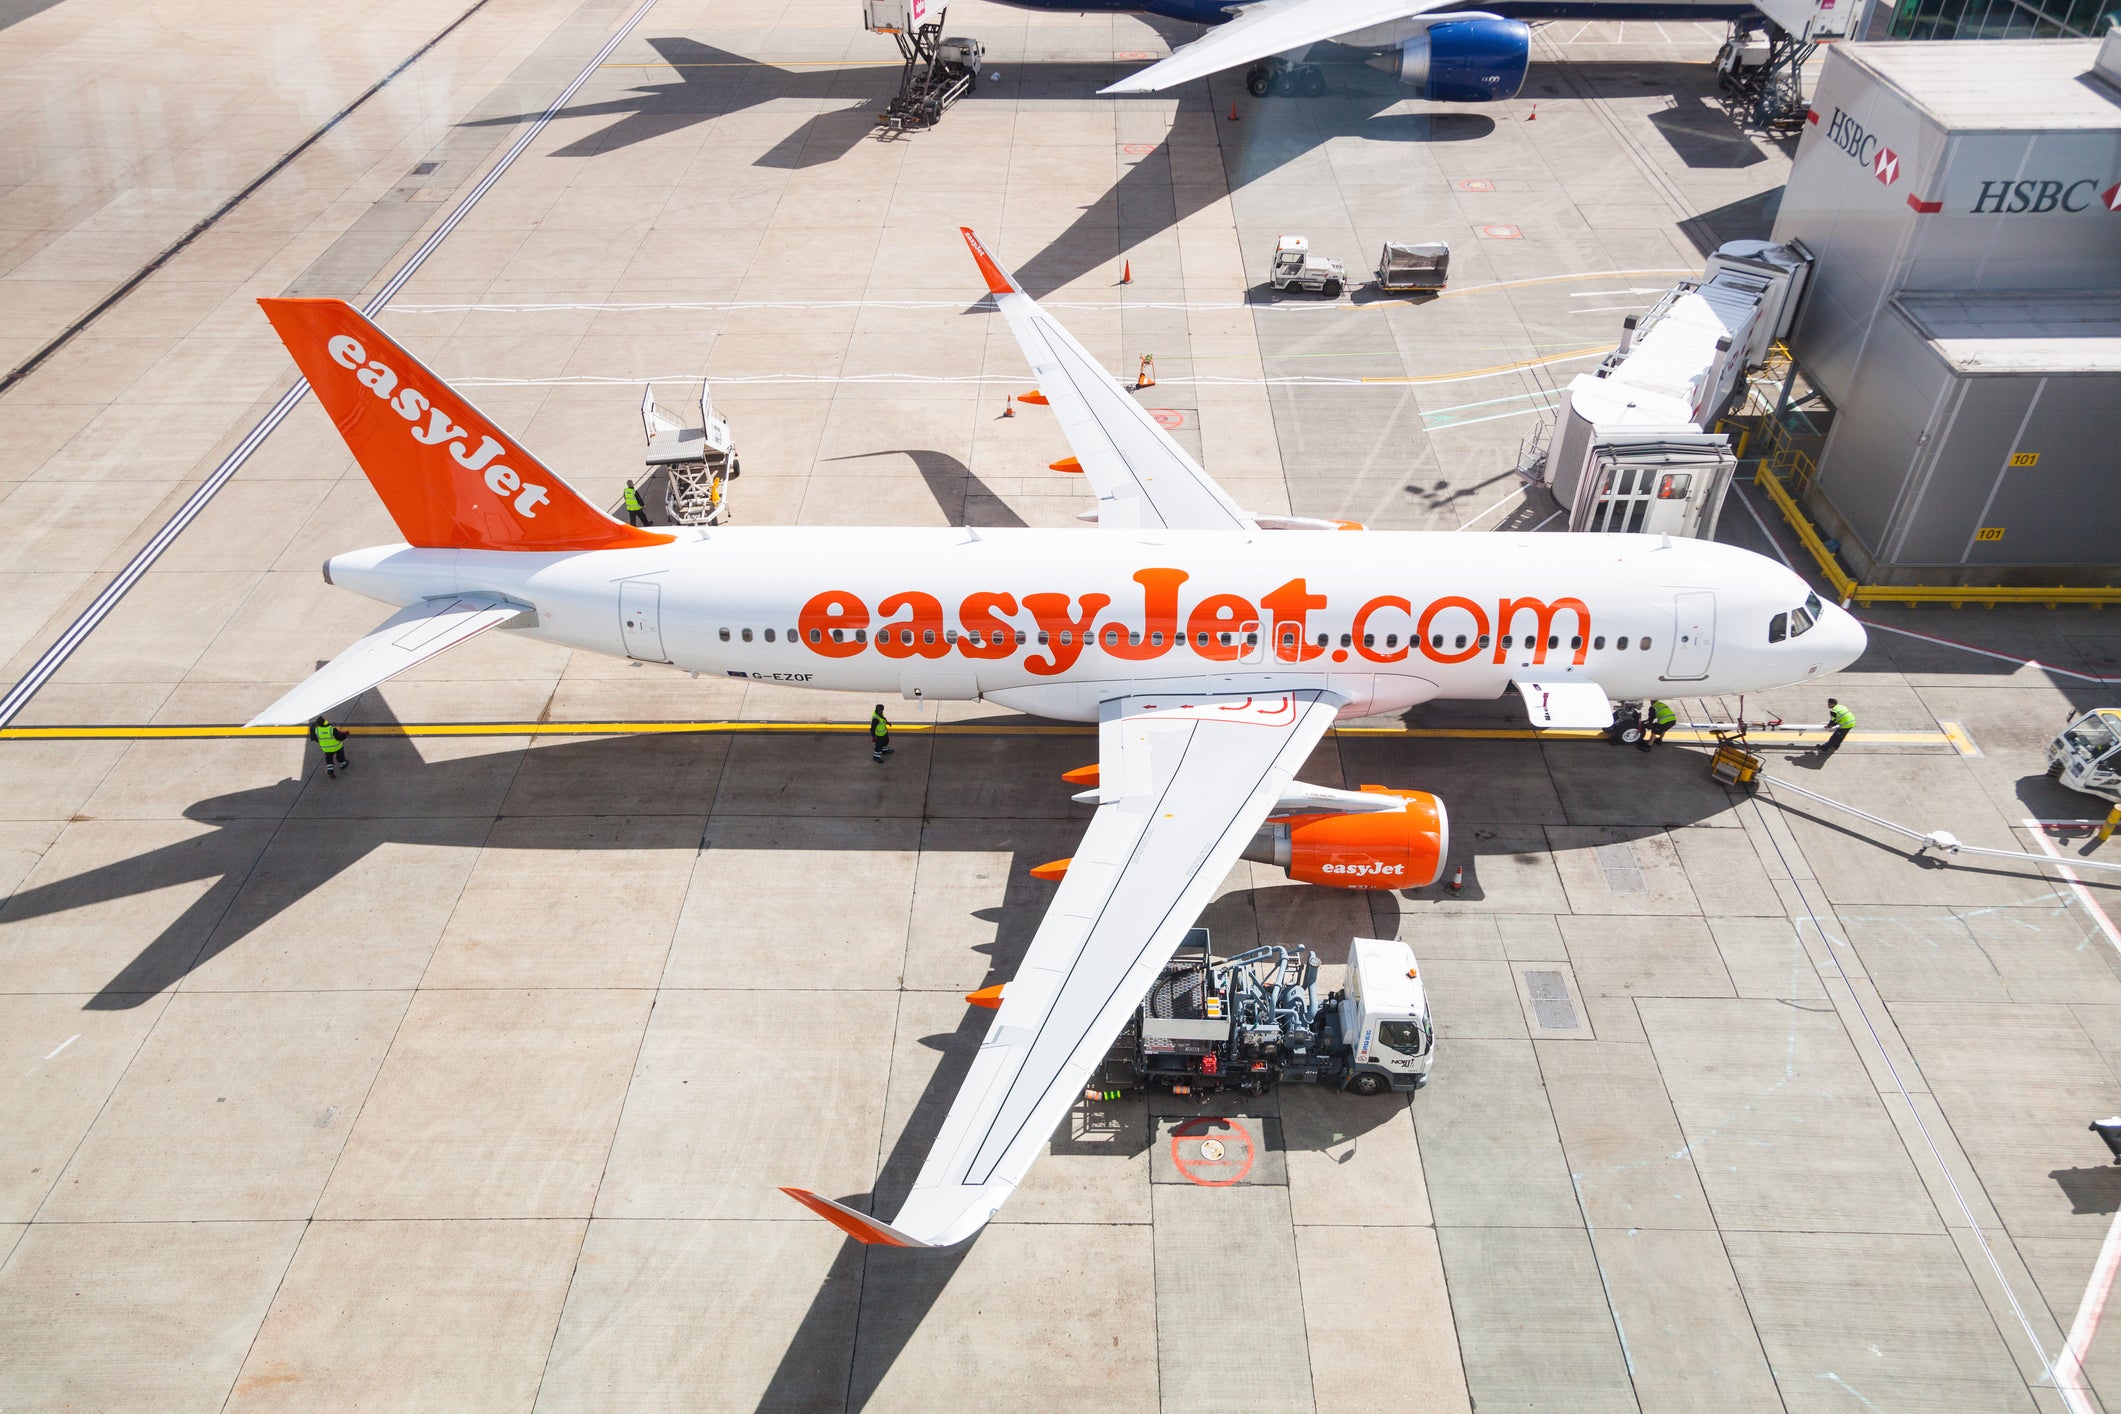 EasyJet impressed with their passenger reviews and safety ratings